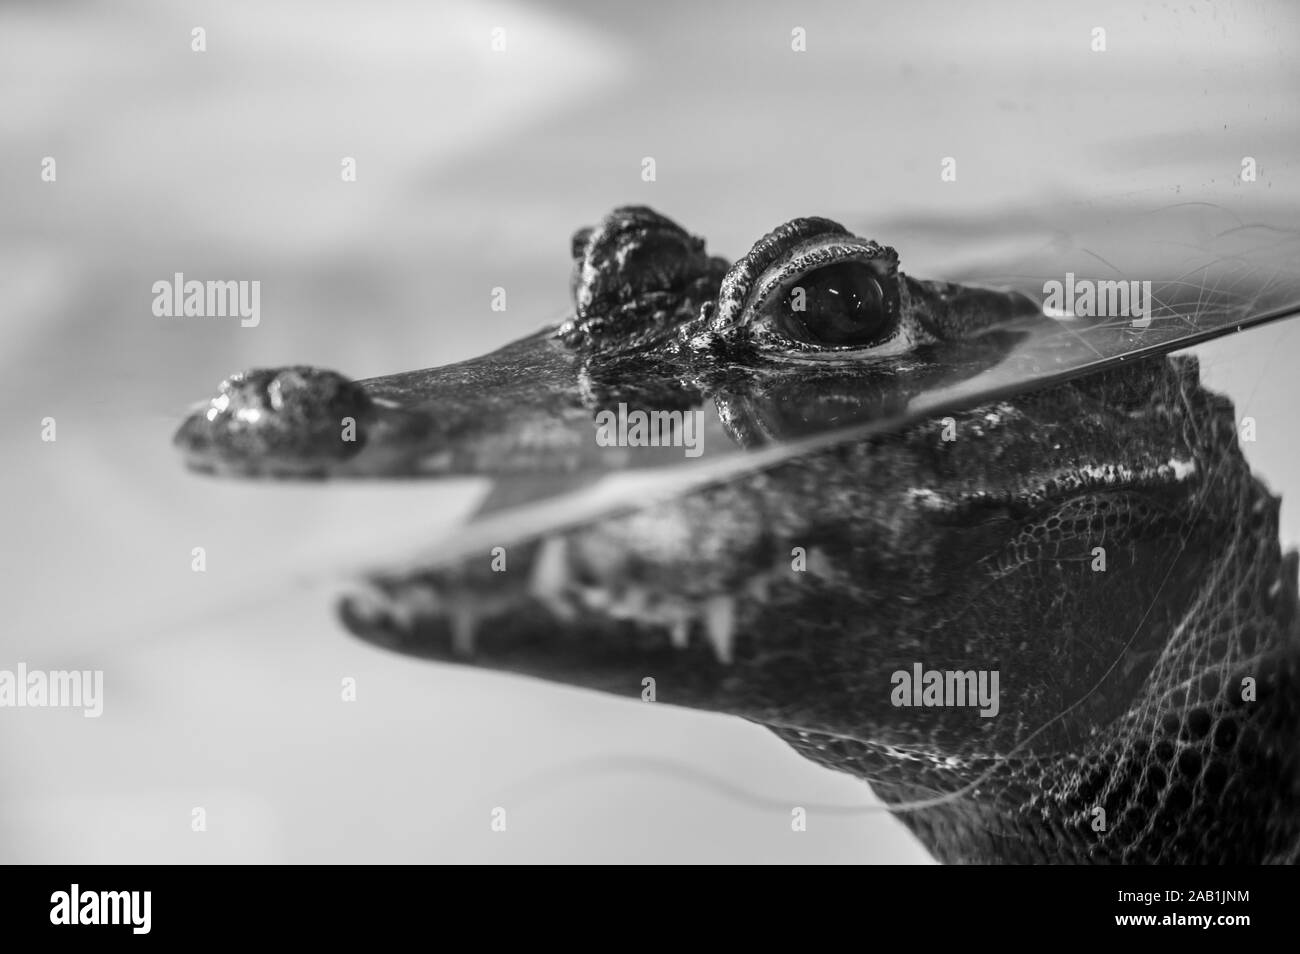 Baby alligator captive behind scratched glass Stock Photo